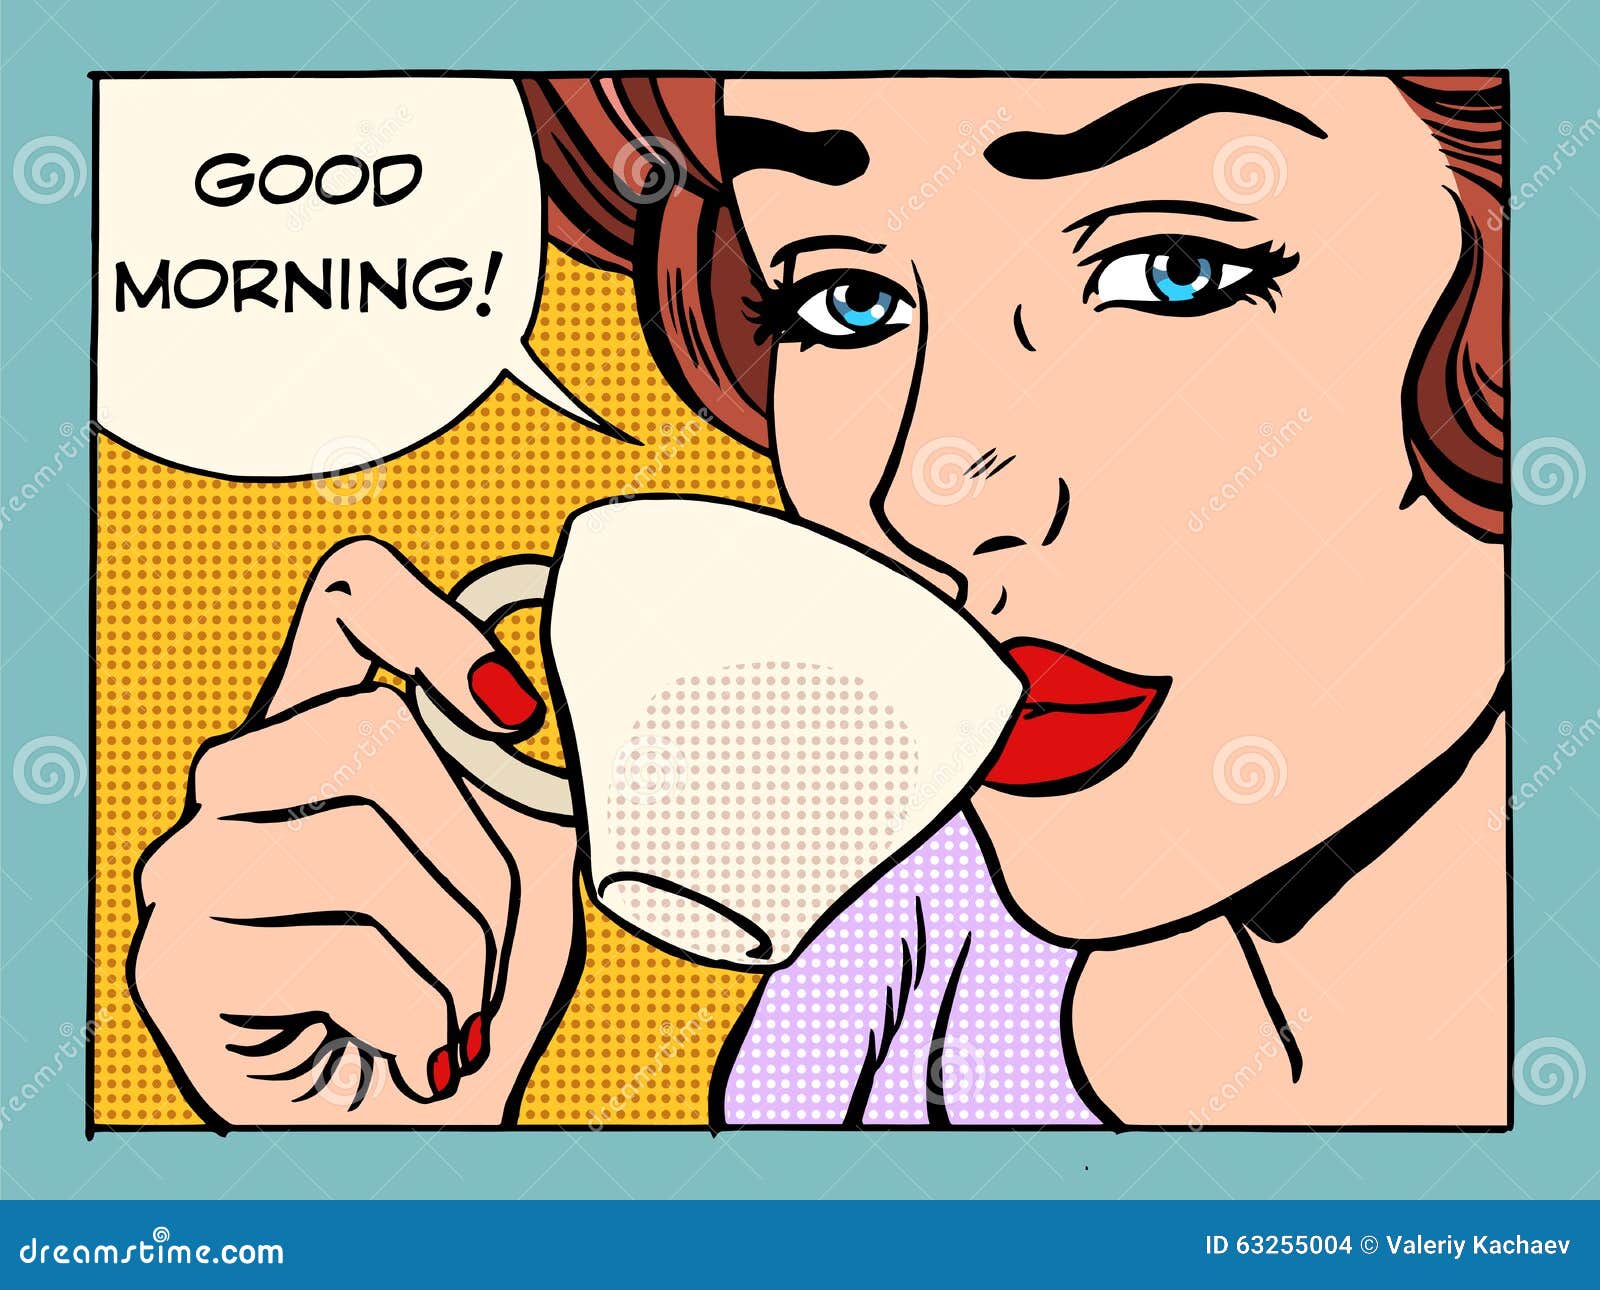 coffee morning clipart - photo #35